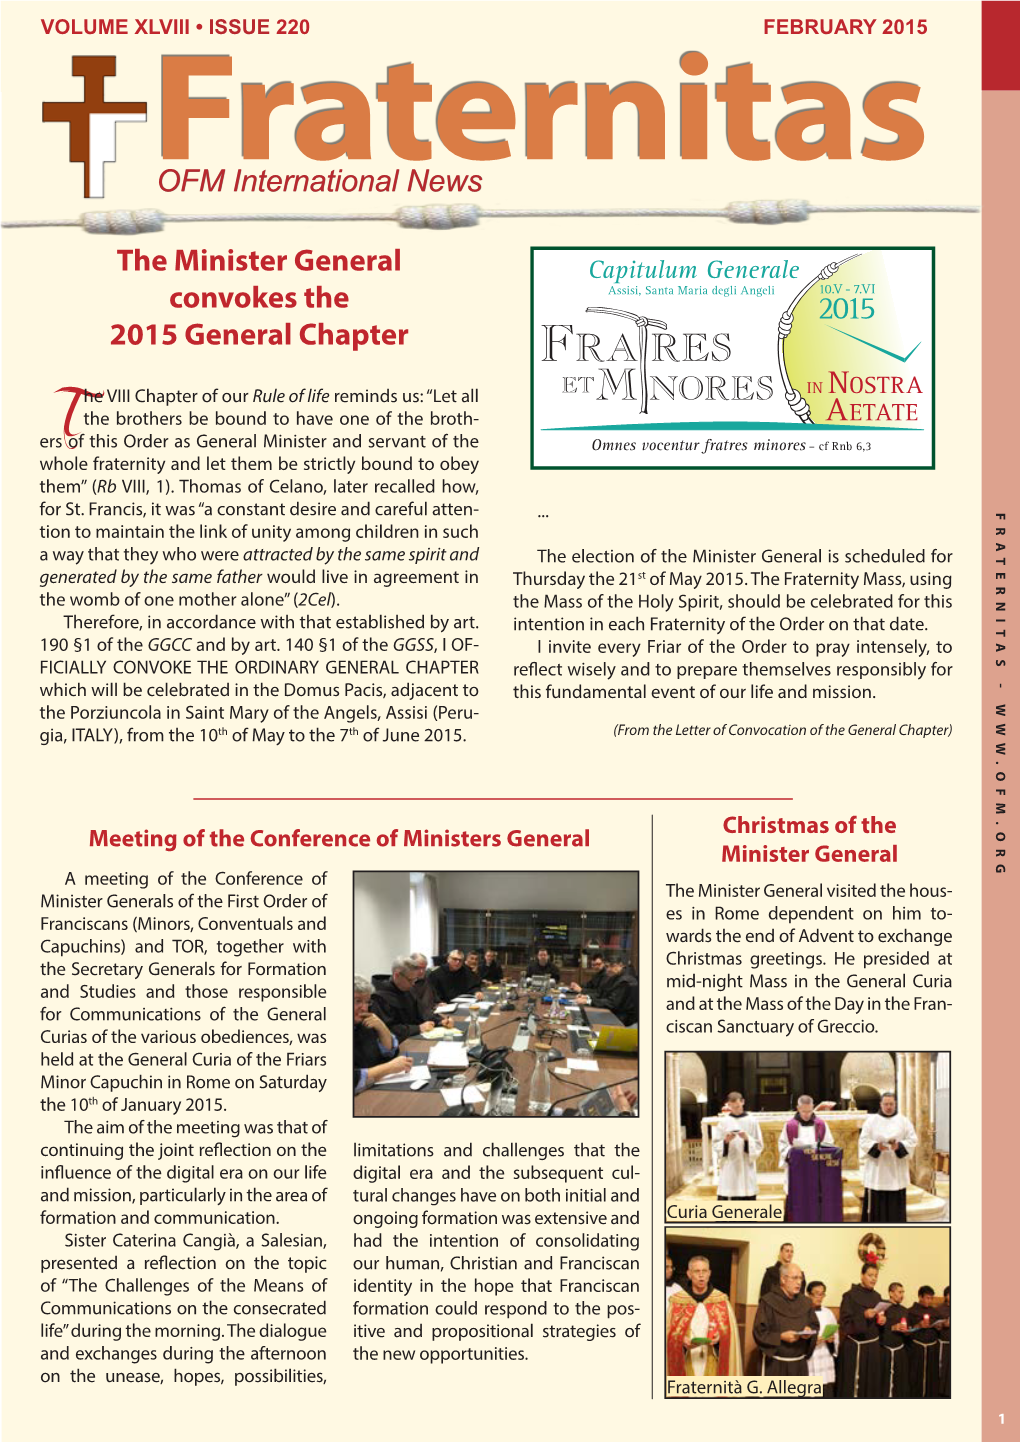 OFM International News the Minister General Convokes the 2015 General Chapter